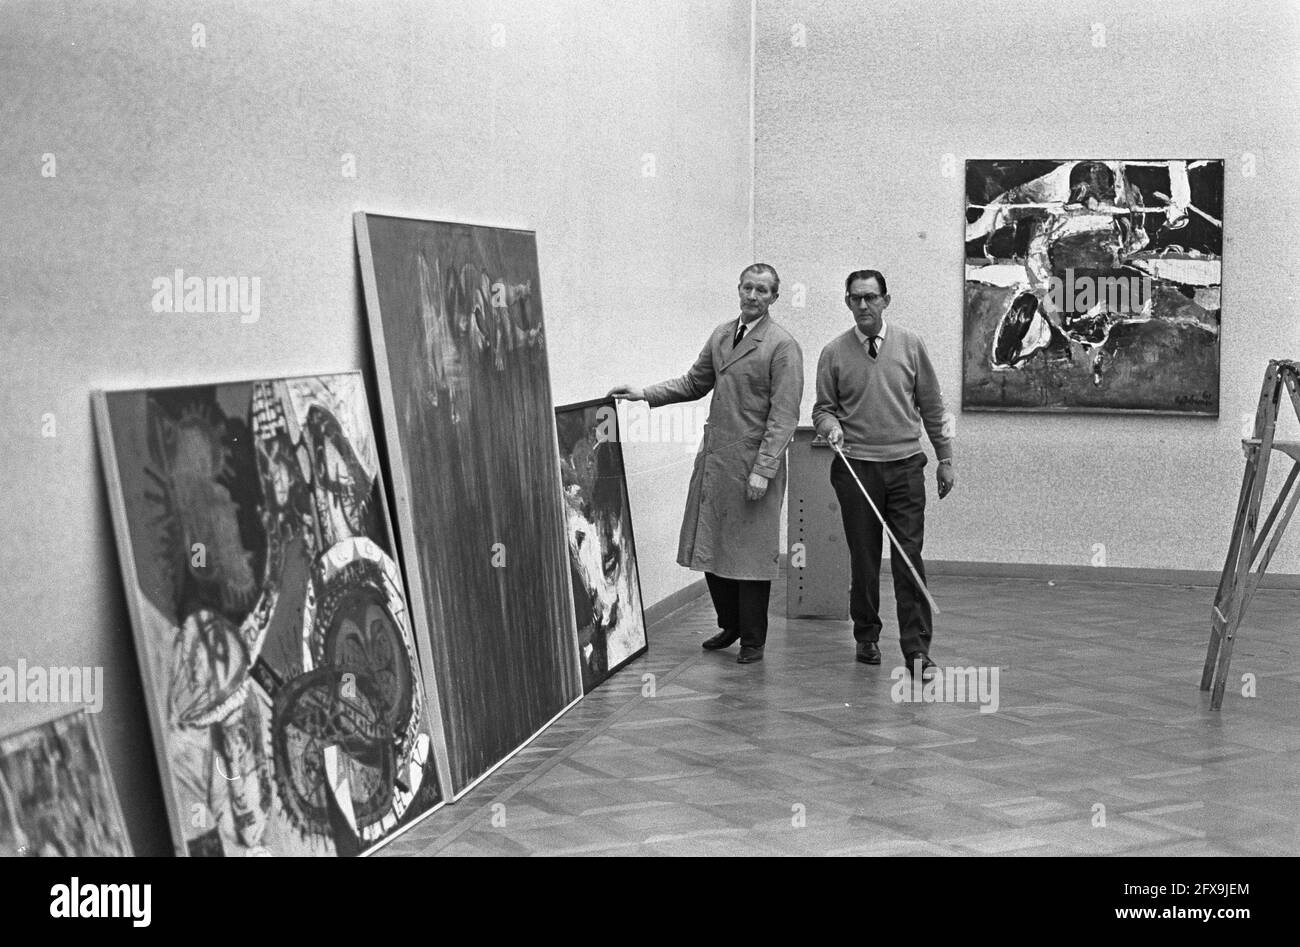 Kees van Bohemen receives Wedgwood Prize, his painting Homage to Floyd Patterson, in Fodor Museum, January 13, 1966, museums, receptions, paintings, The Netherlands, 20th century press agency photo, news to remember, documentary, historic photography 1945-1990, visual stories, human history of the Twentieth Century, capturing moments in time Stock Photo